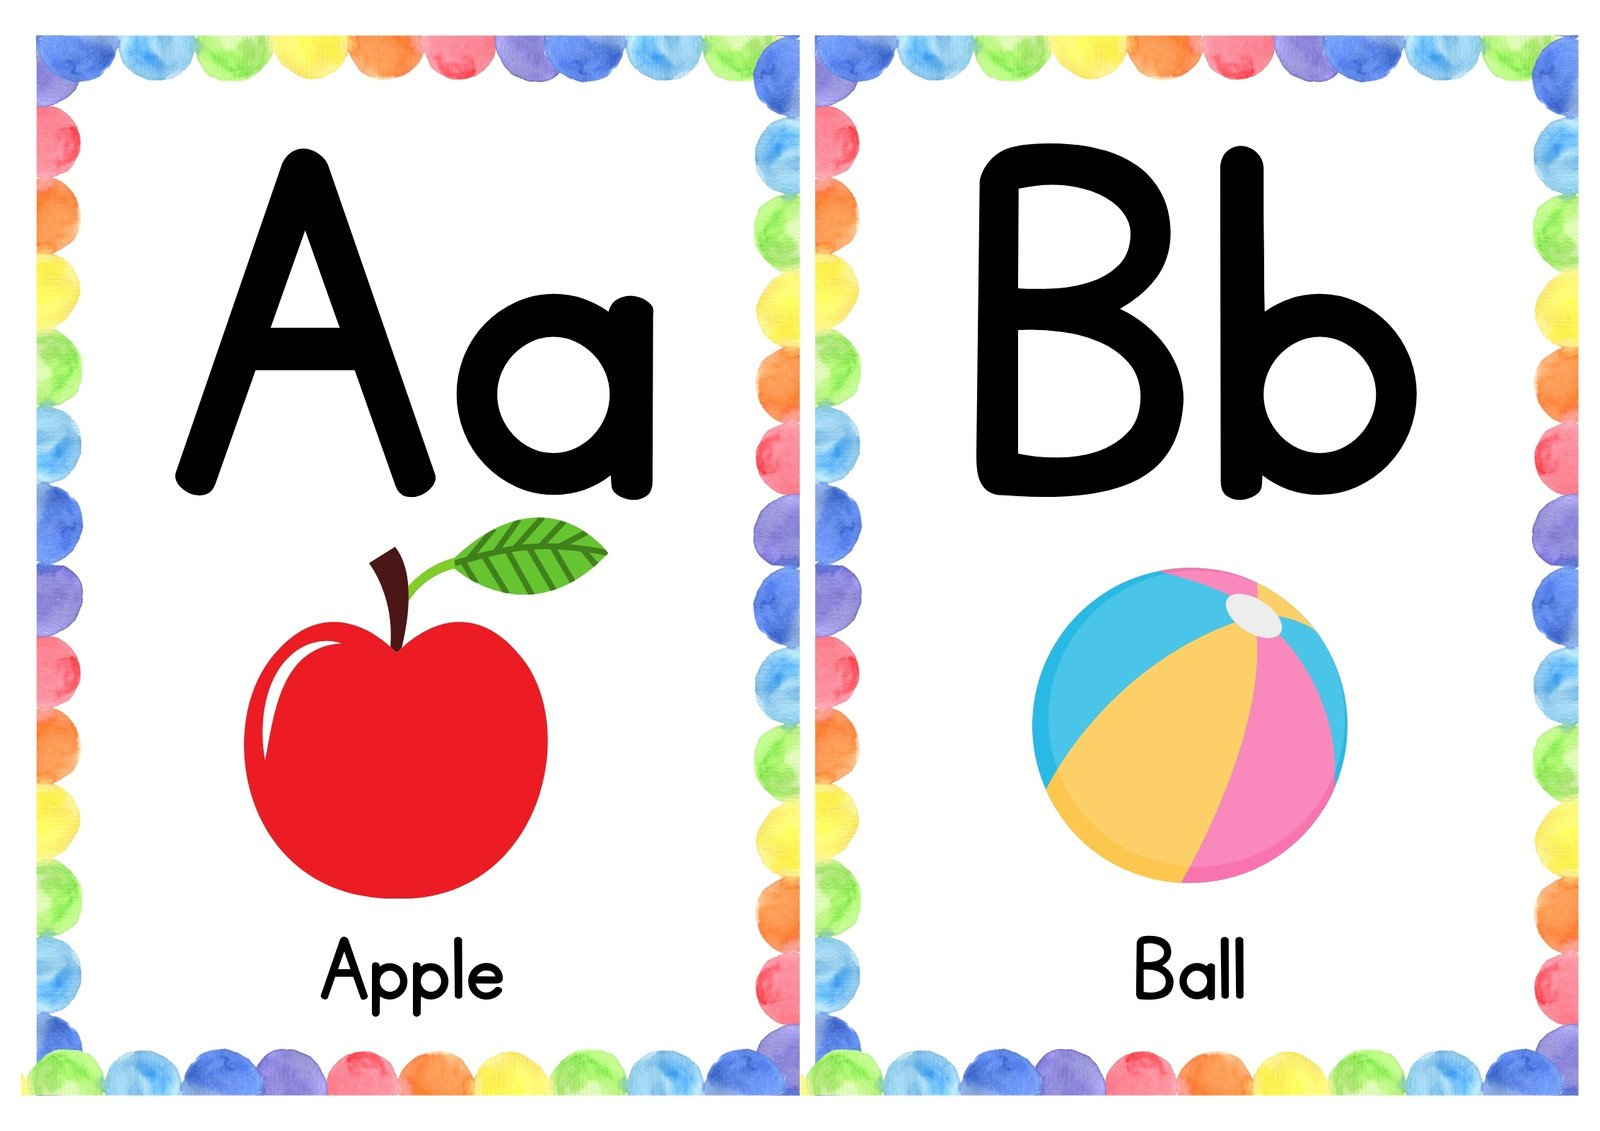 Free Customizable Alphabet Flashcard Templates | Canva throughout Free Printable Abc Flashcards With Pictures